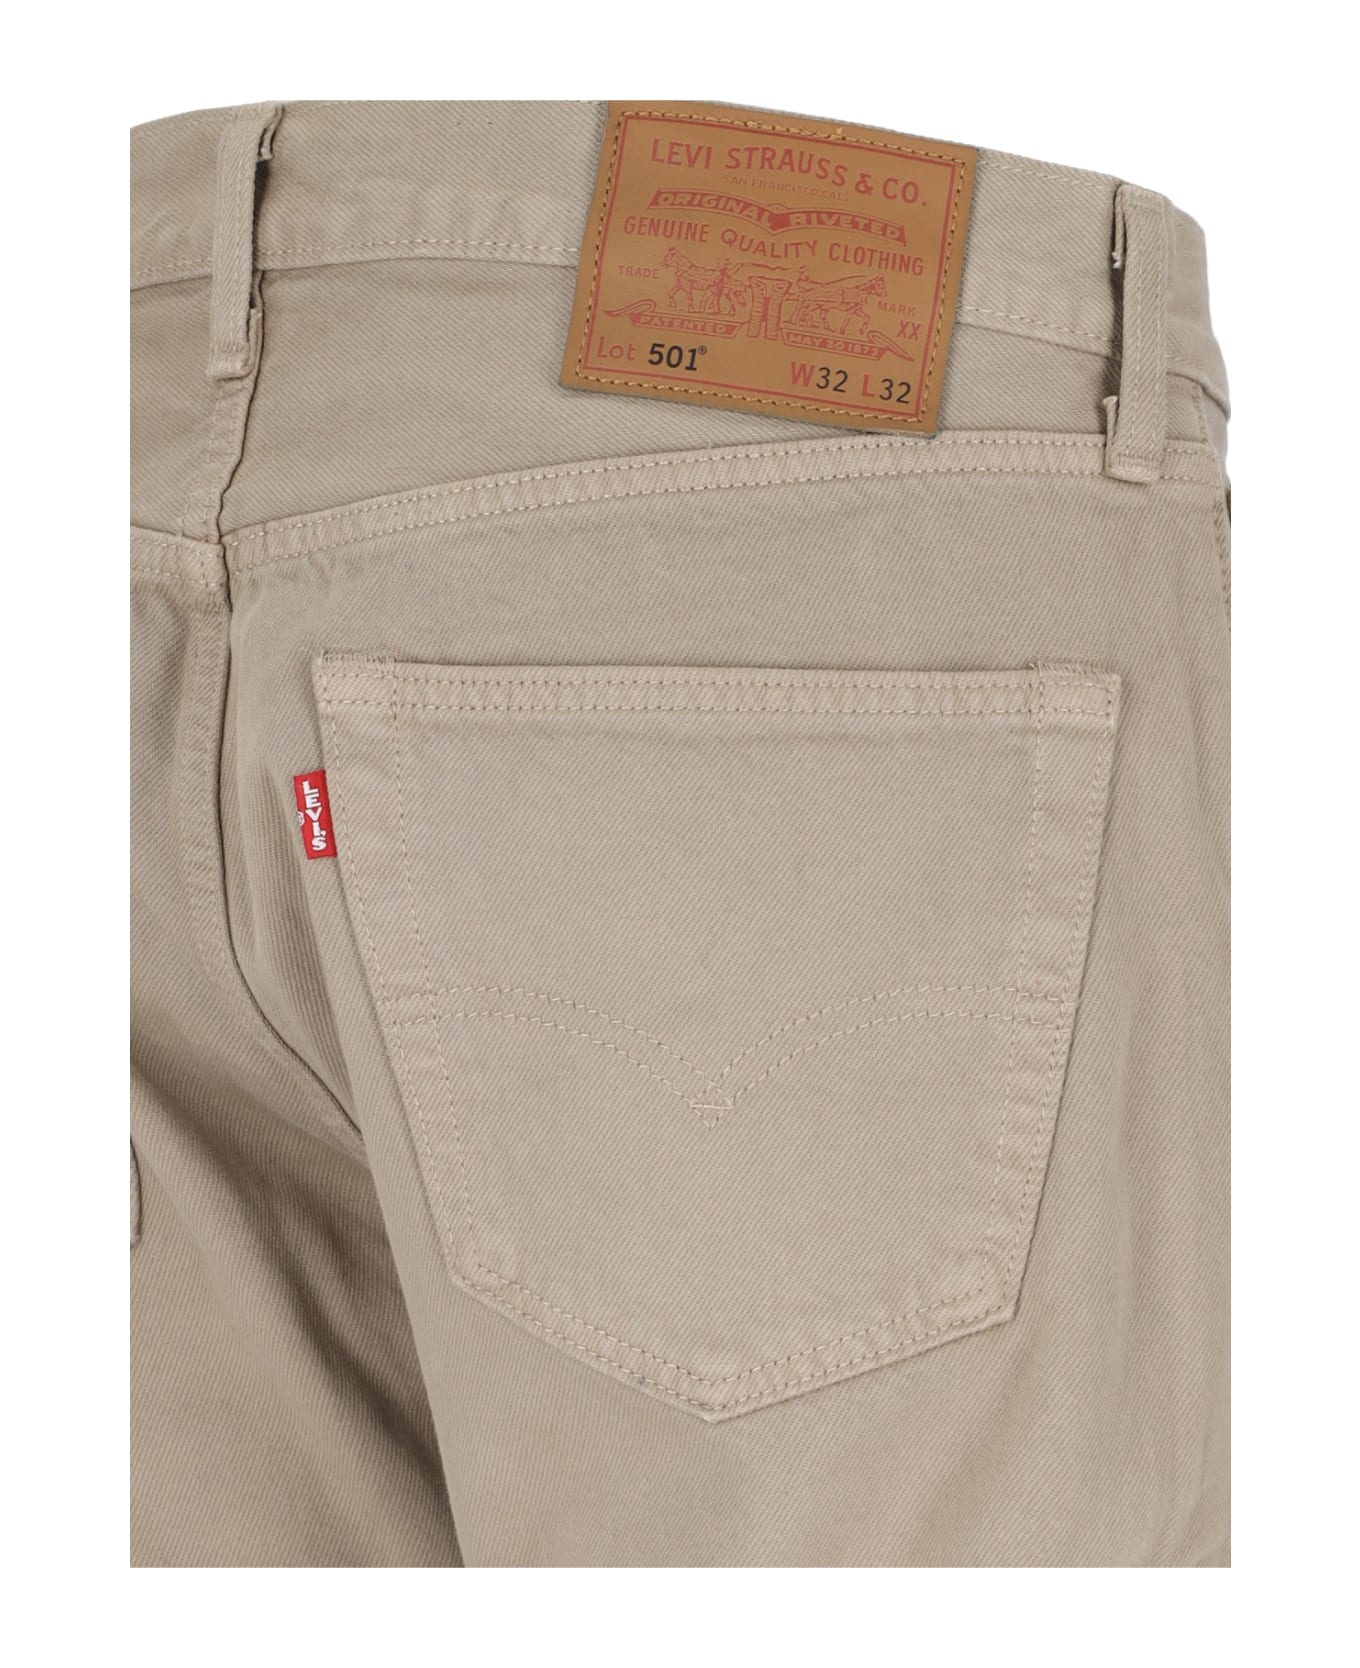 Levi's "501" Straight Jeans - Beige